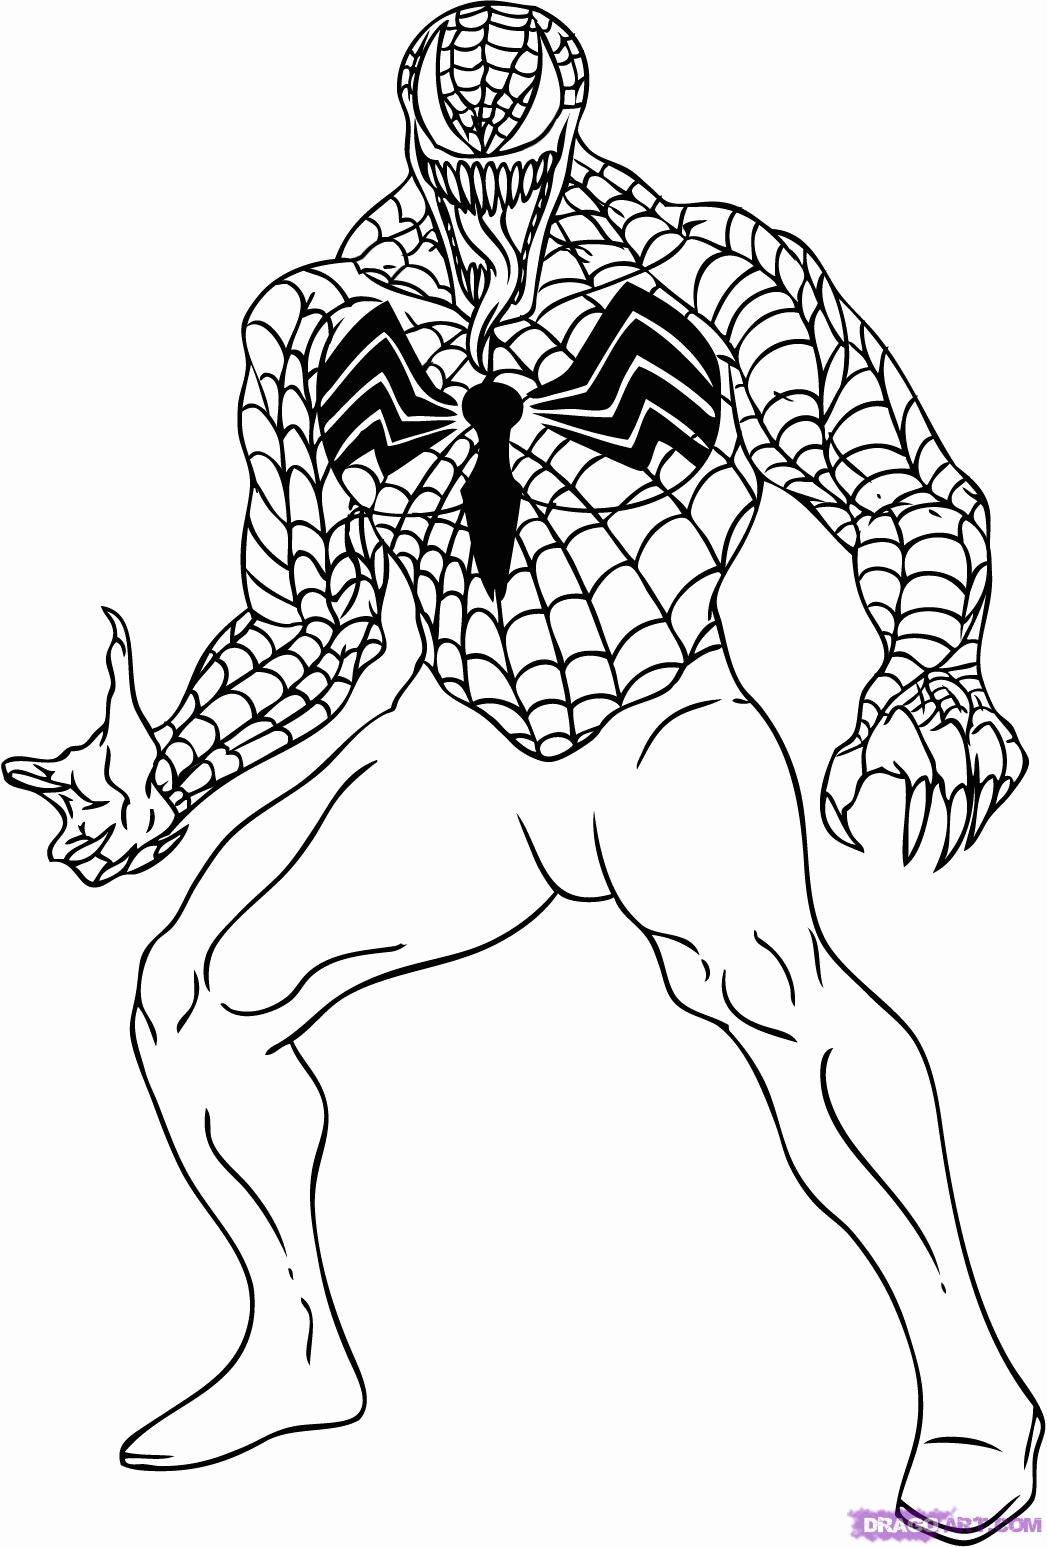 Venom 05  coloring page to print and coloring